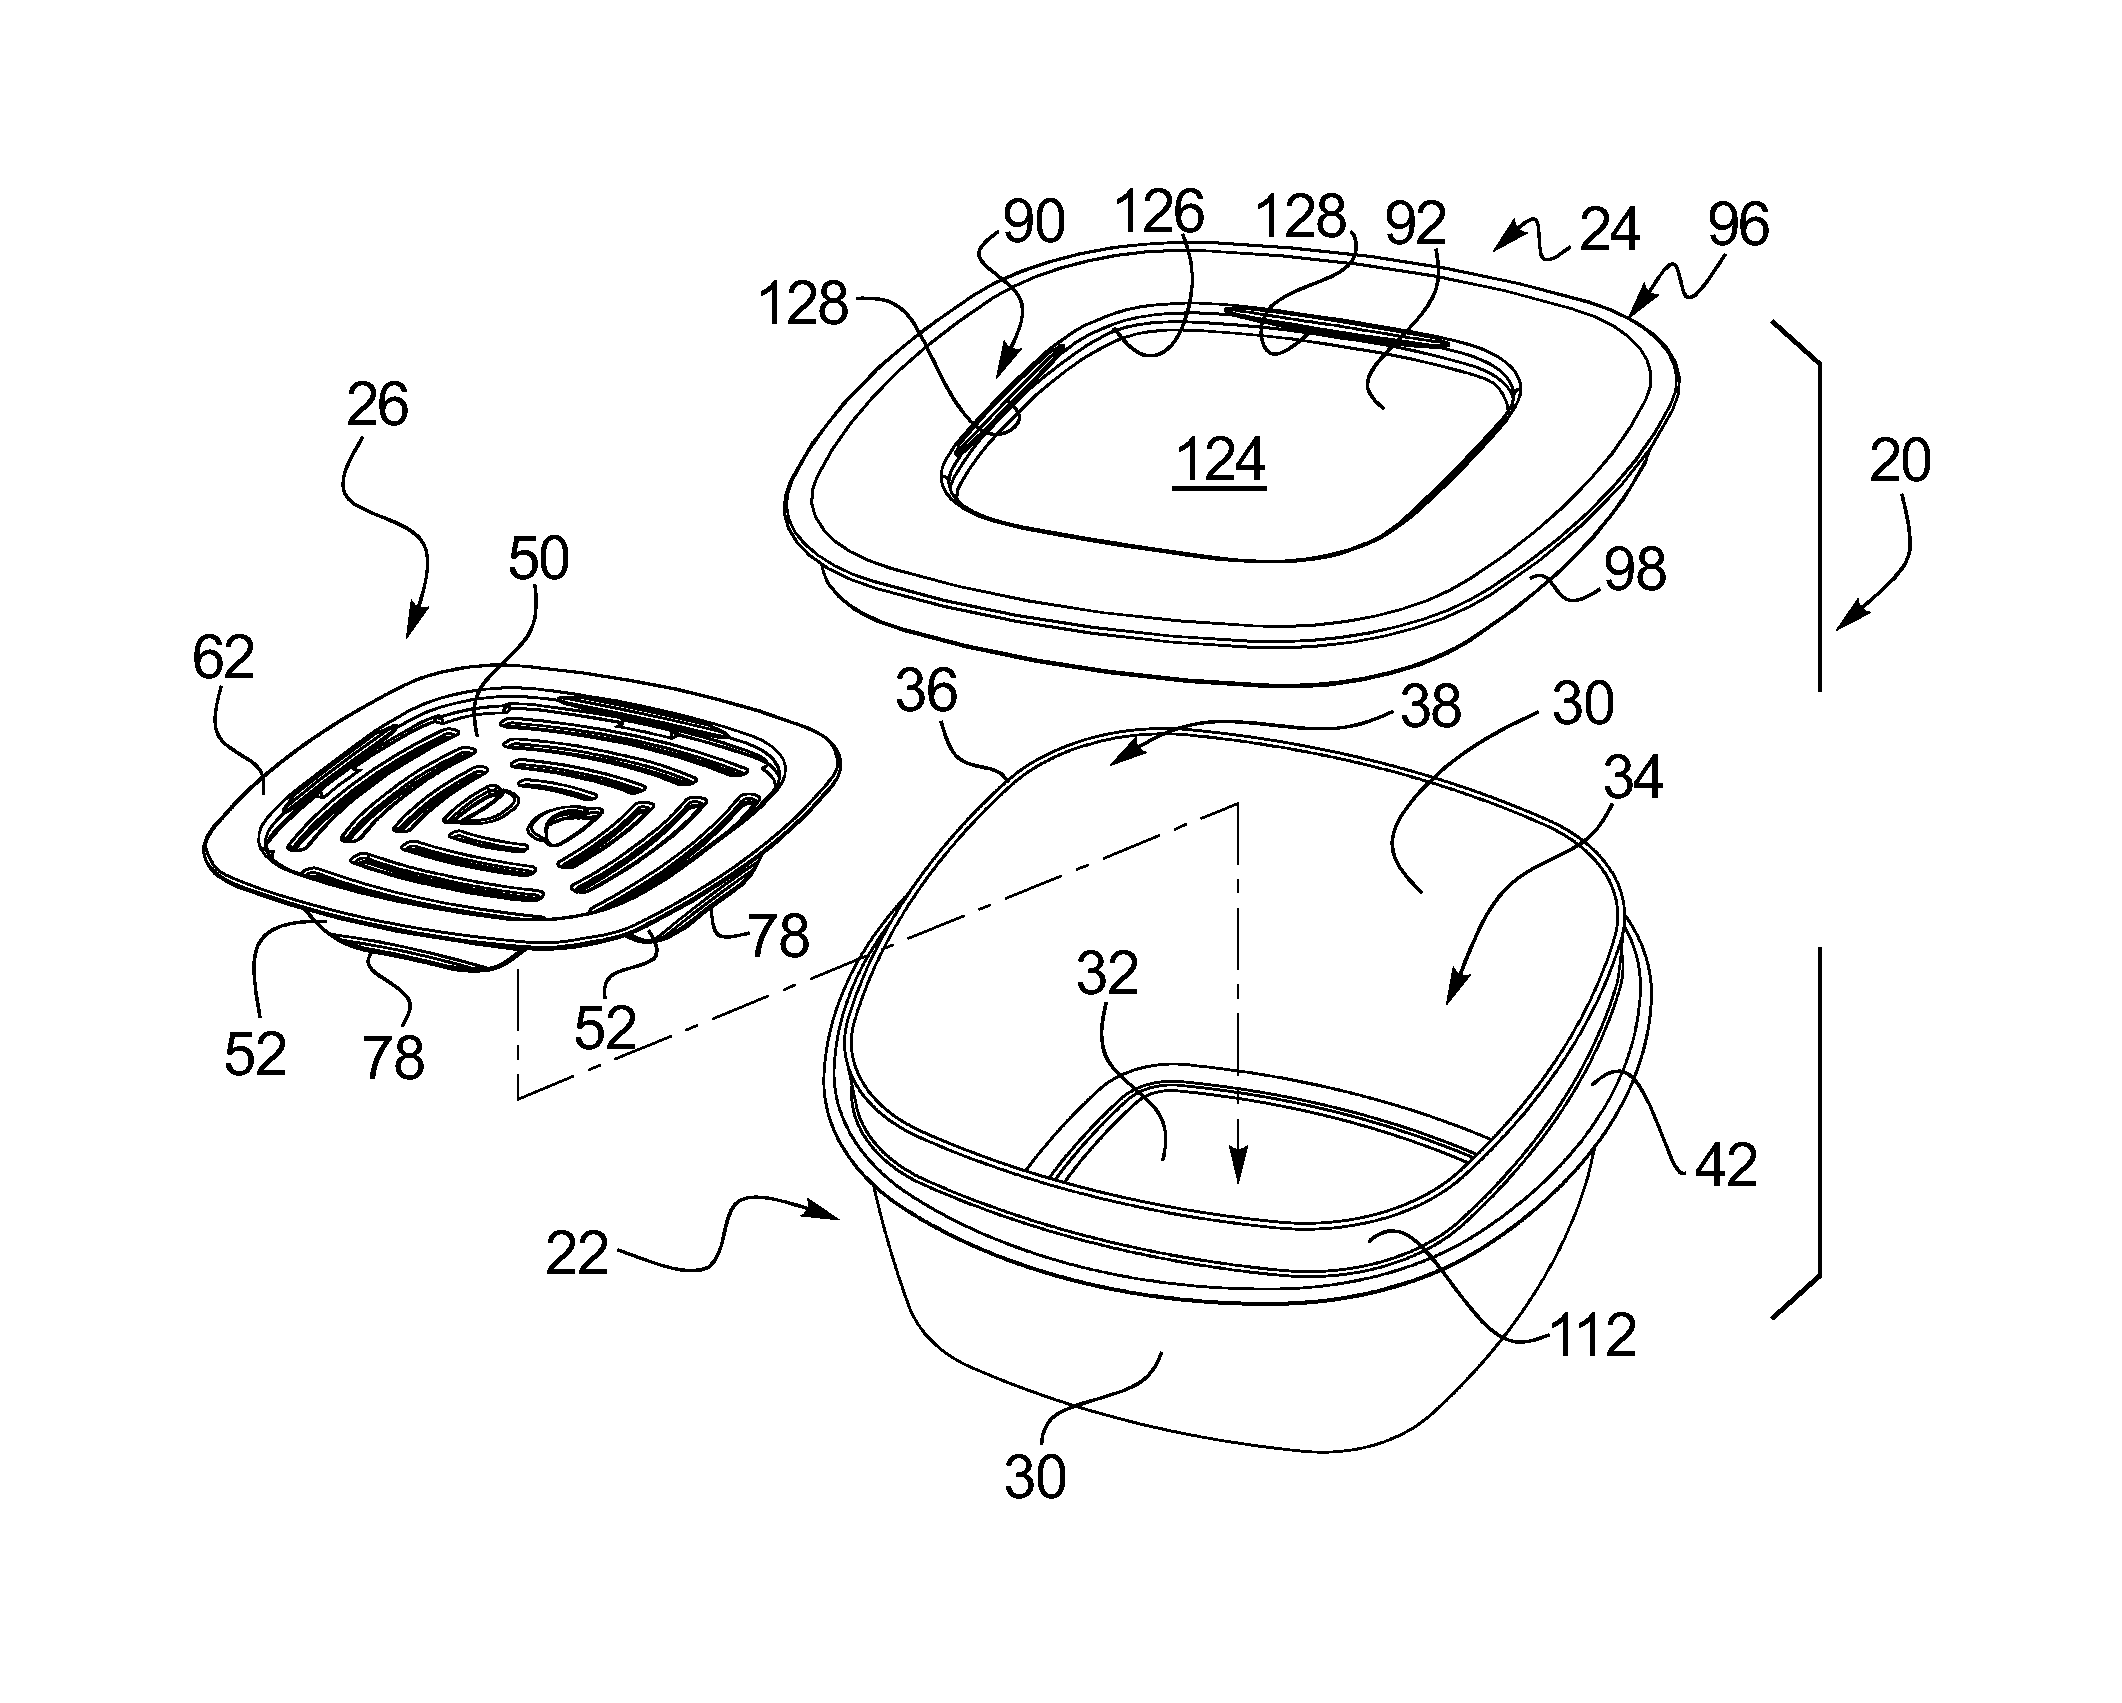 patent illustration for food storage container and container system